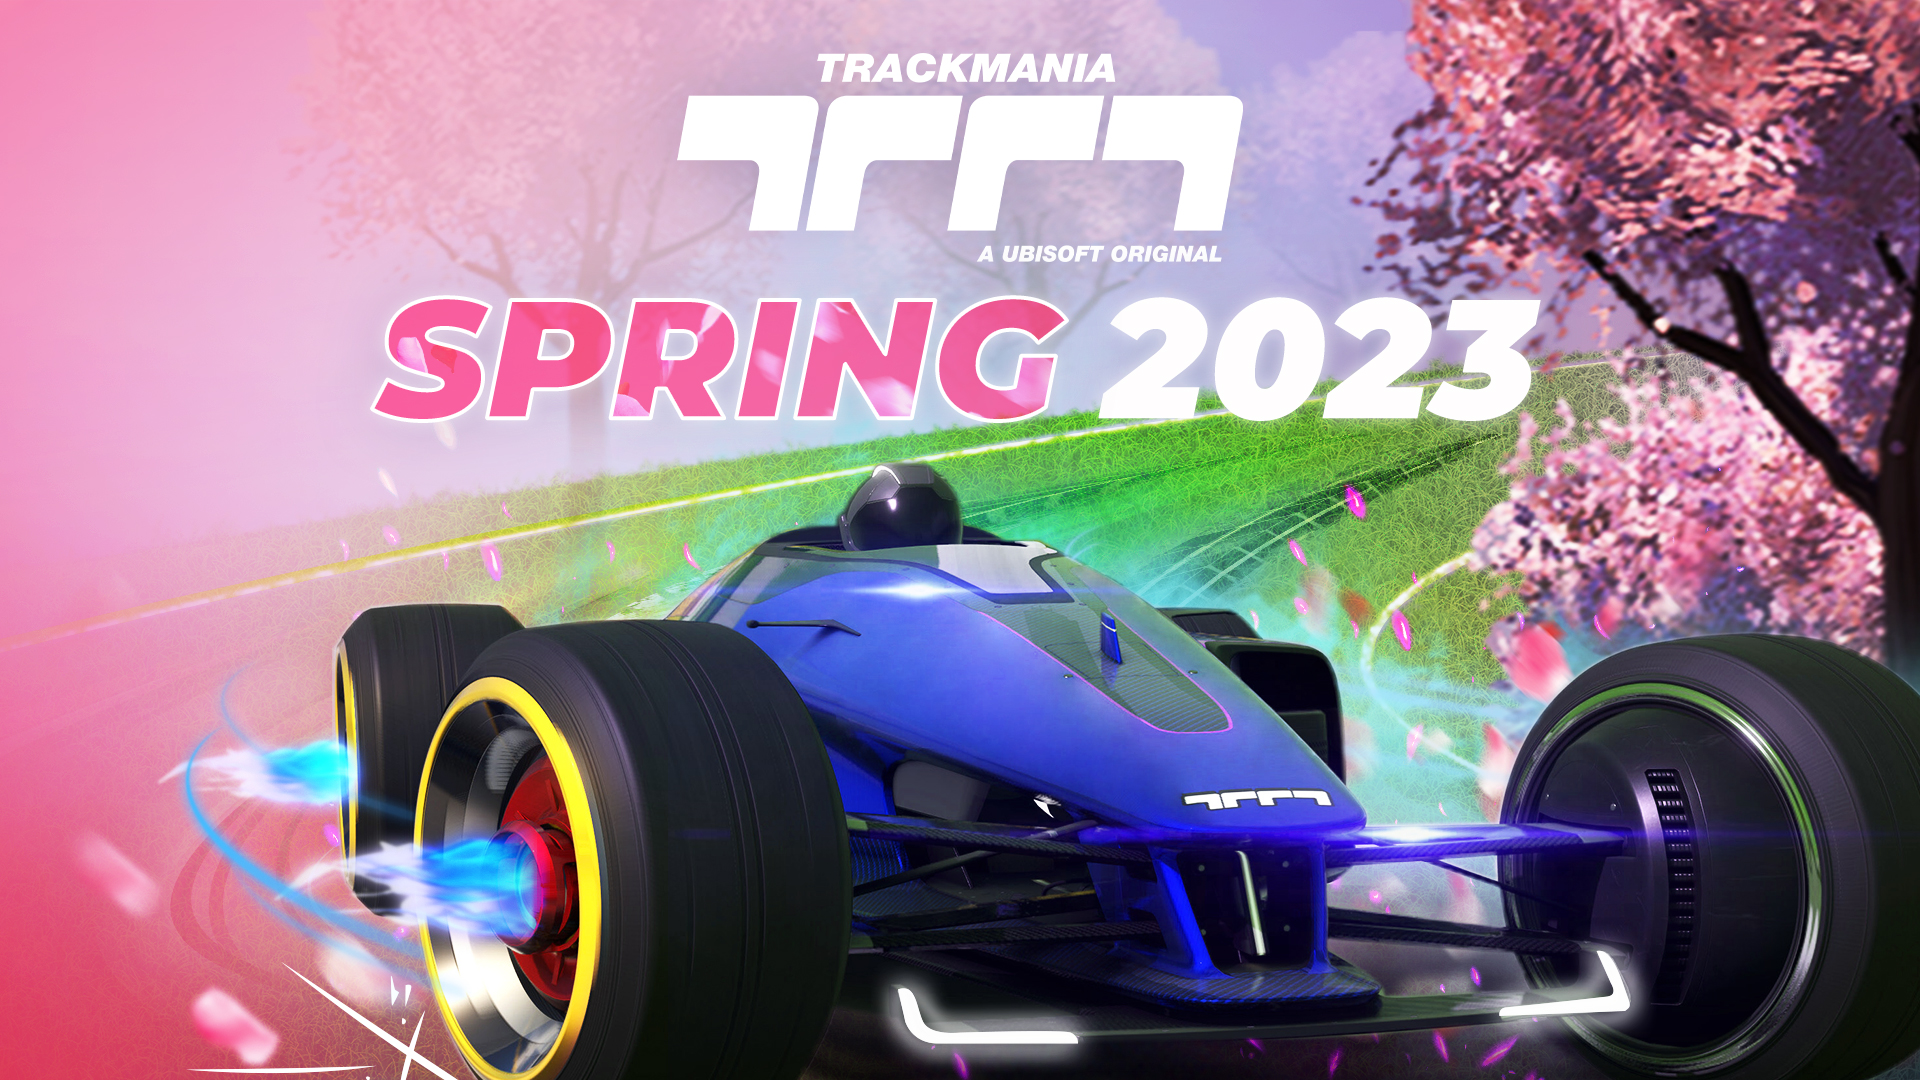 Spring 2023 campaign out on April 1st!